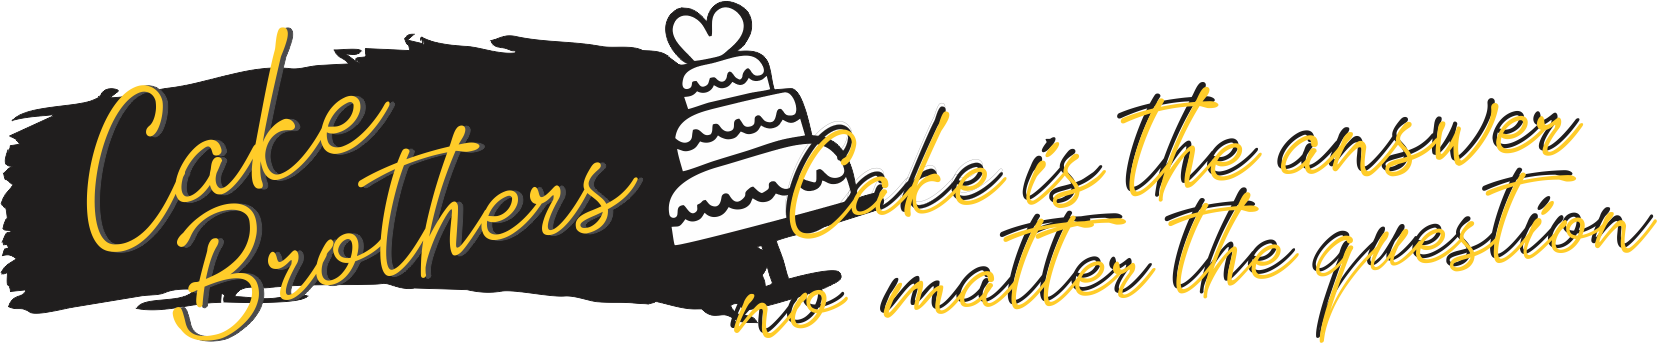 Cake Brothers Logo PNG